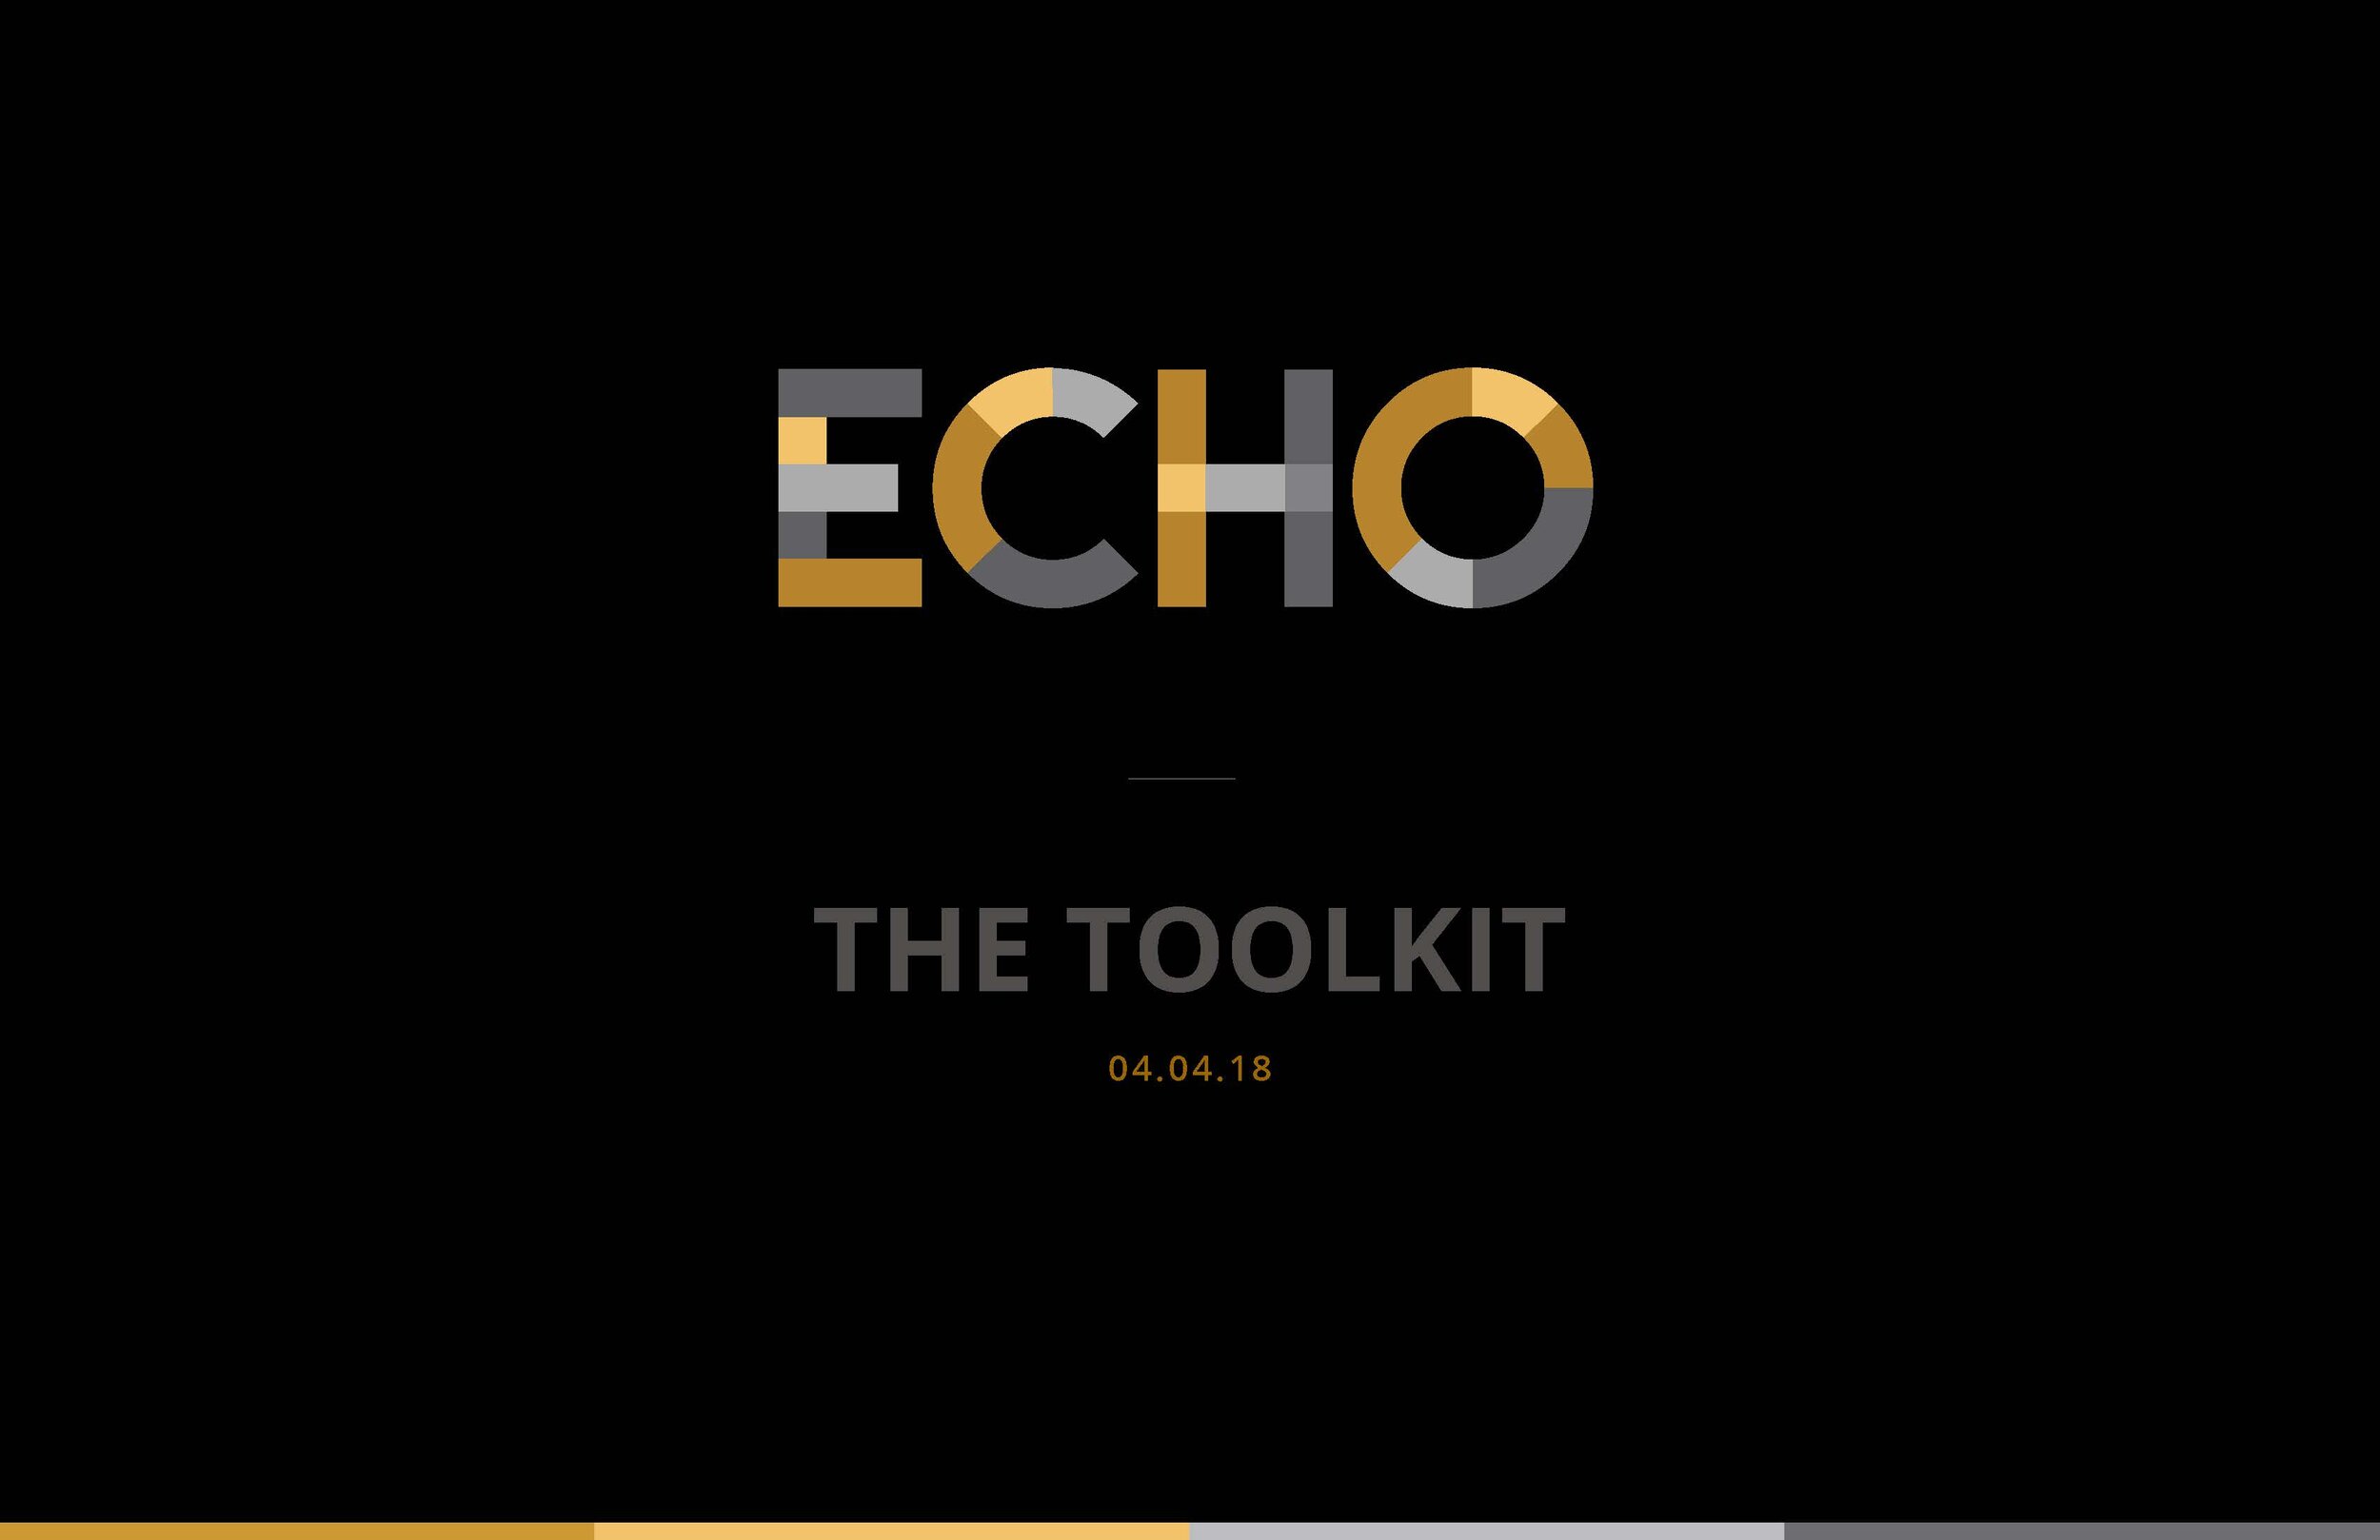 Echo_Toolkit_4.04.18_Page_01.jpg